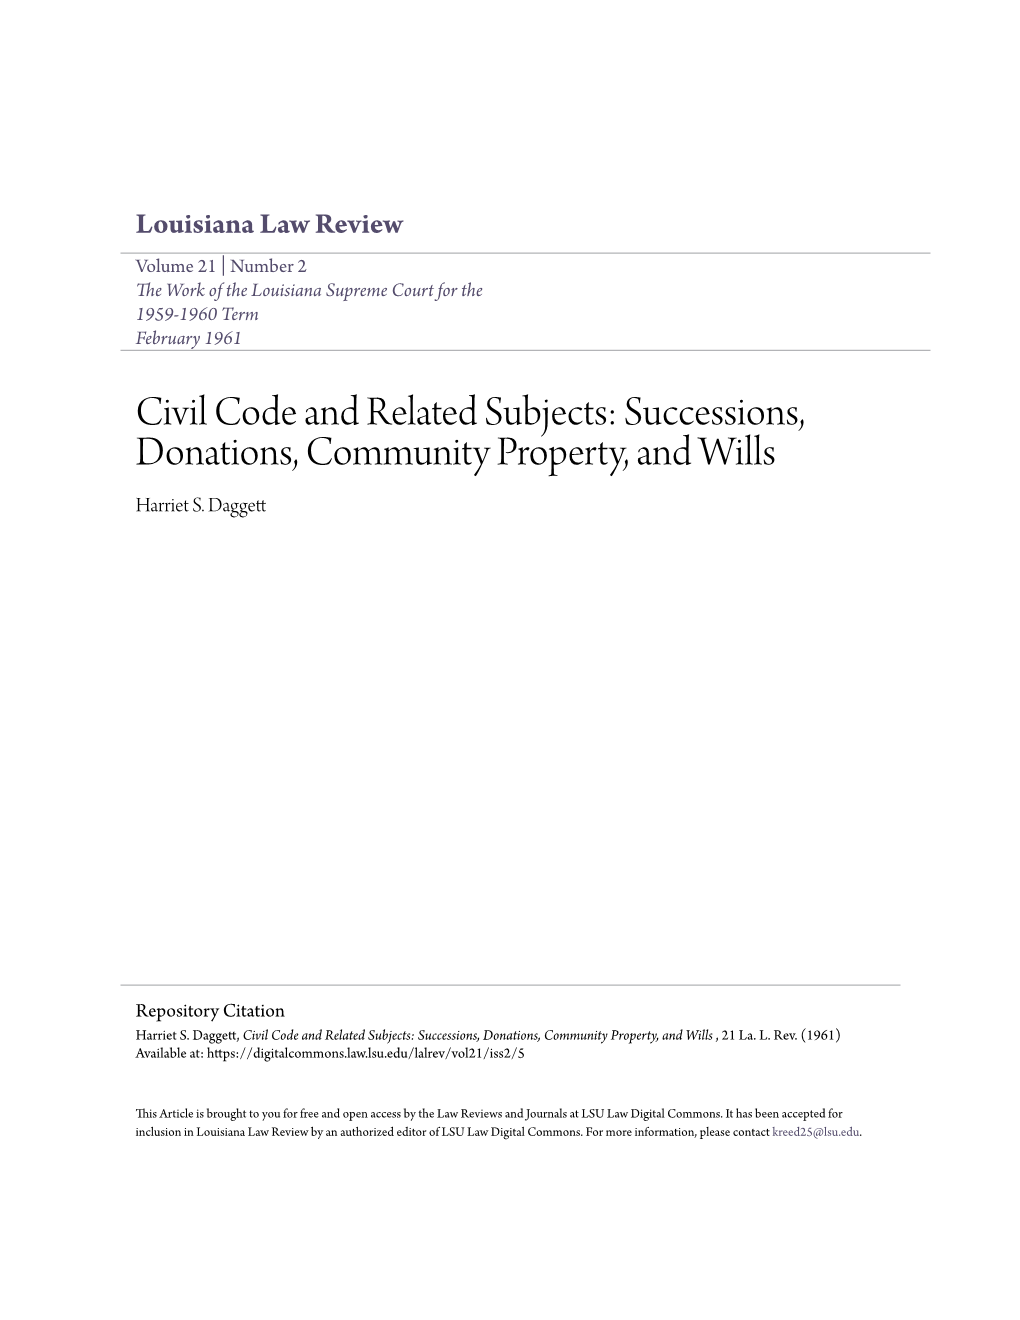 Civil Code and Related Subjects: Successions, Donations, Community Property, and Wills Harriet S